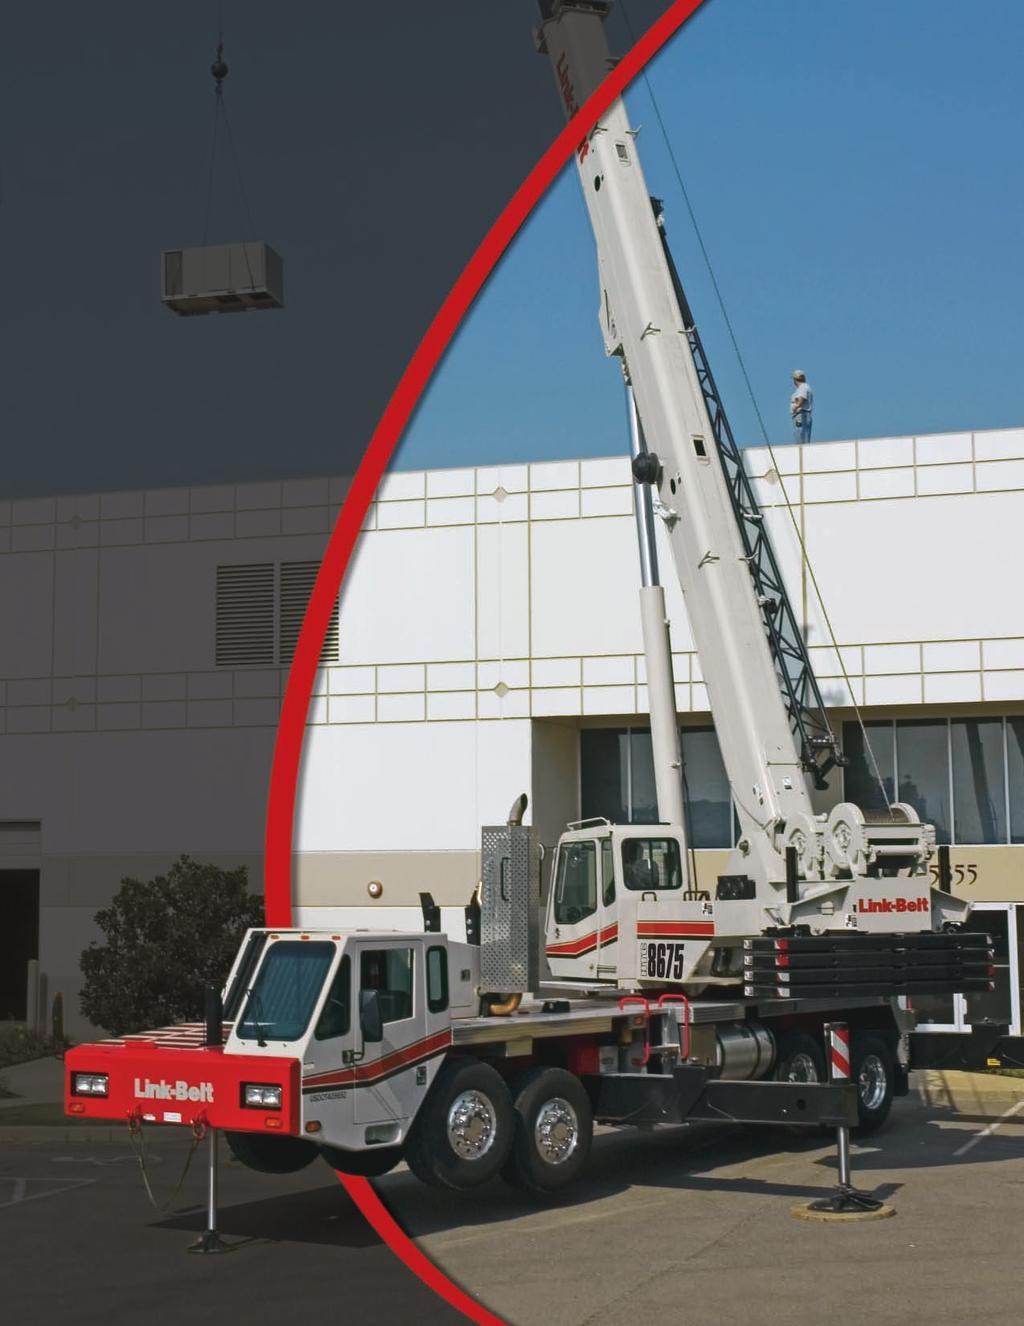 SERIES II 75-ton (70.0 mt) Hydraulic Truck Crane SERIES II 75-ton (70.0 mt) Truck Terrain Crane The HTT s all-wheel steer provides outstanding on-site mobility. 75 tons at 9 ft radius (70.0 mt at 2.